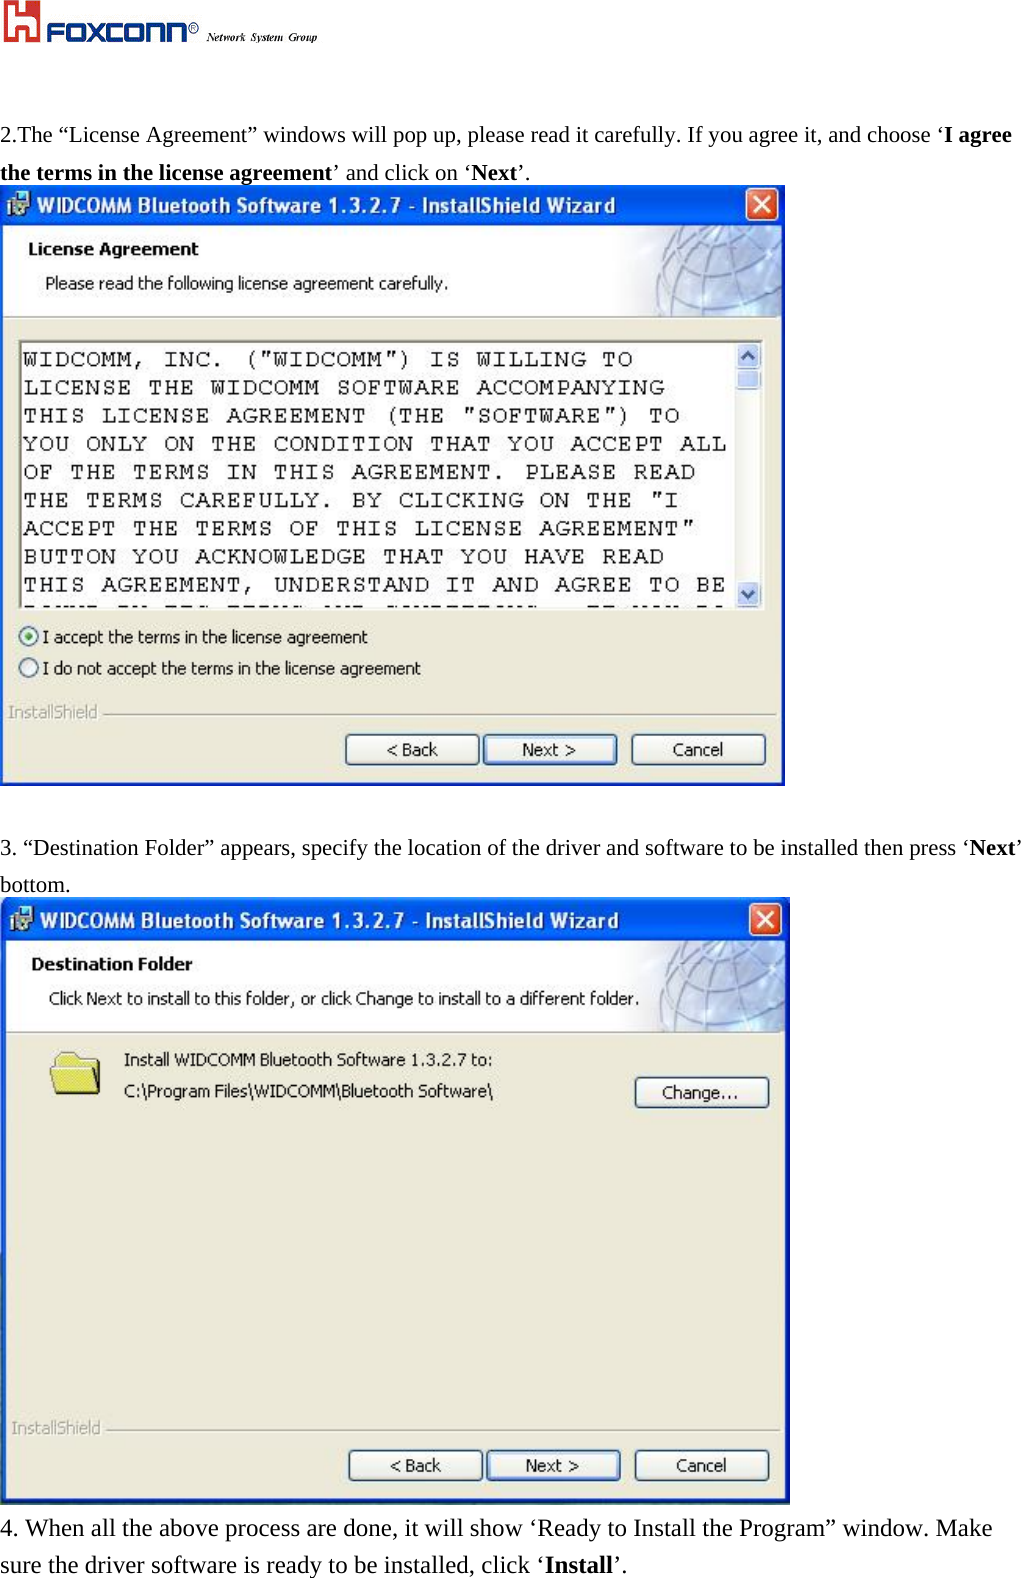   2.The “License Agreement” windows will pop up, please read it carefully. If you agree it, and choose ‘I agree the terms in the license agreement’ and click on ‘Next’.   3. “Destination Folder” appears, specify the location of the driver and software to be installed then press ‘Next’ bottom.  4. When all the above process are done, it will show ‘Ready to Install the Program” window. Make sure the driver software is ready to be installed, click ‘Install’. 